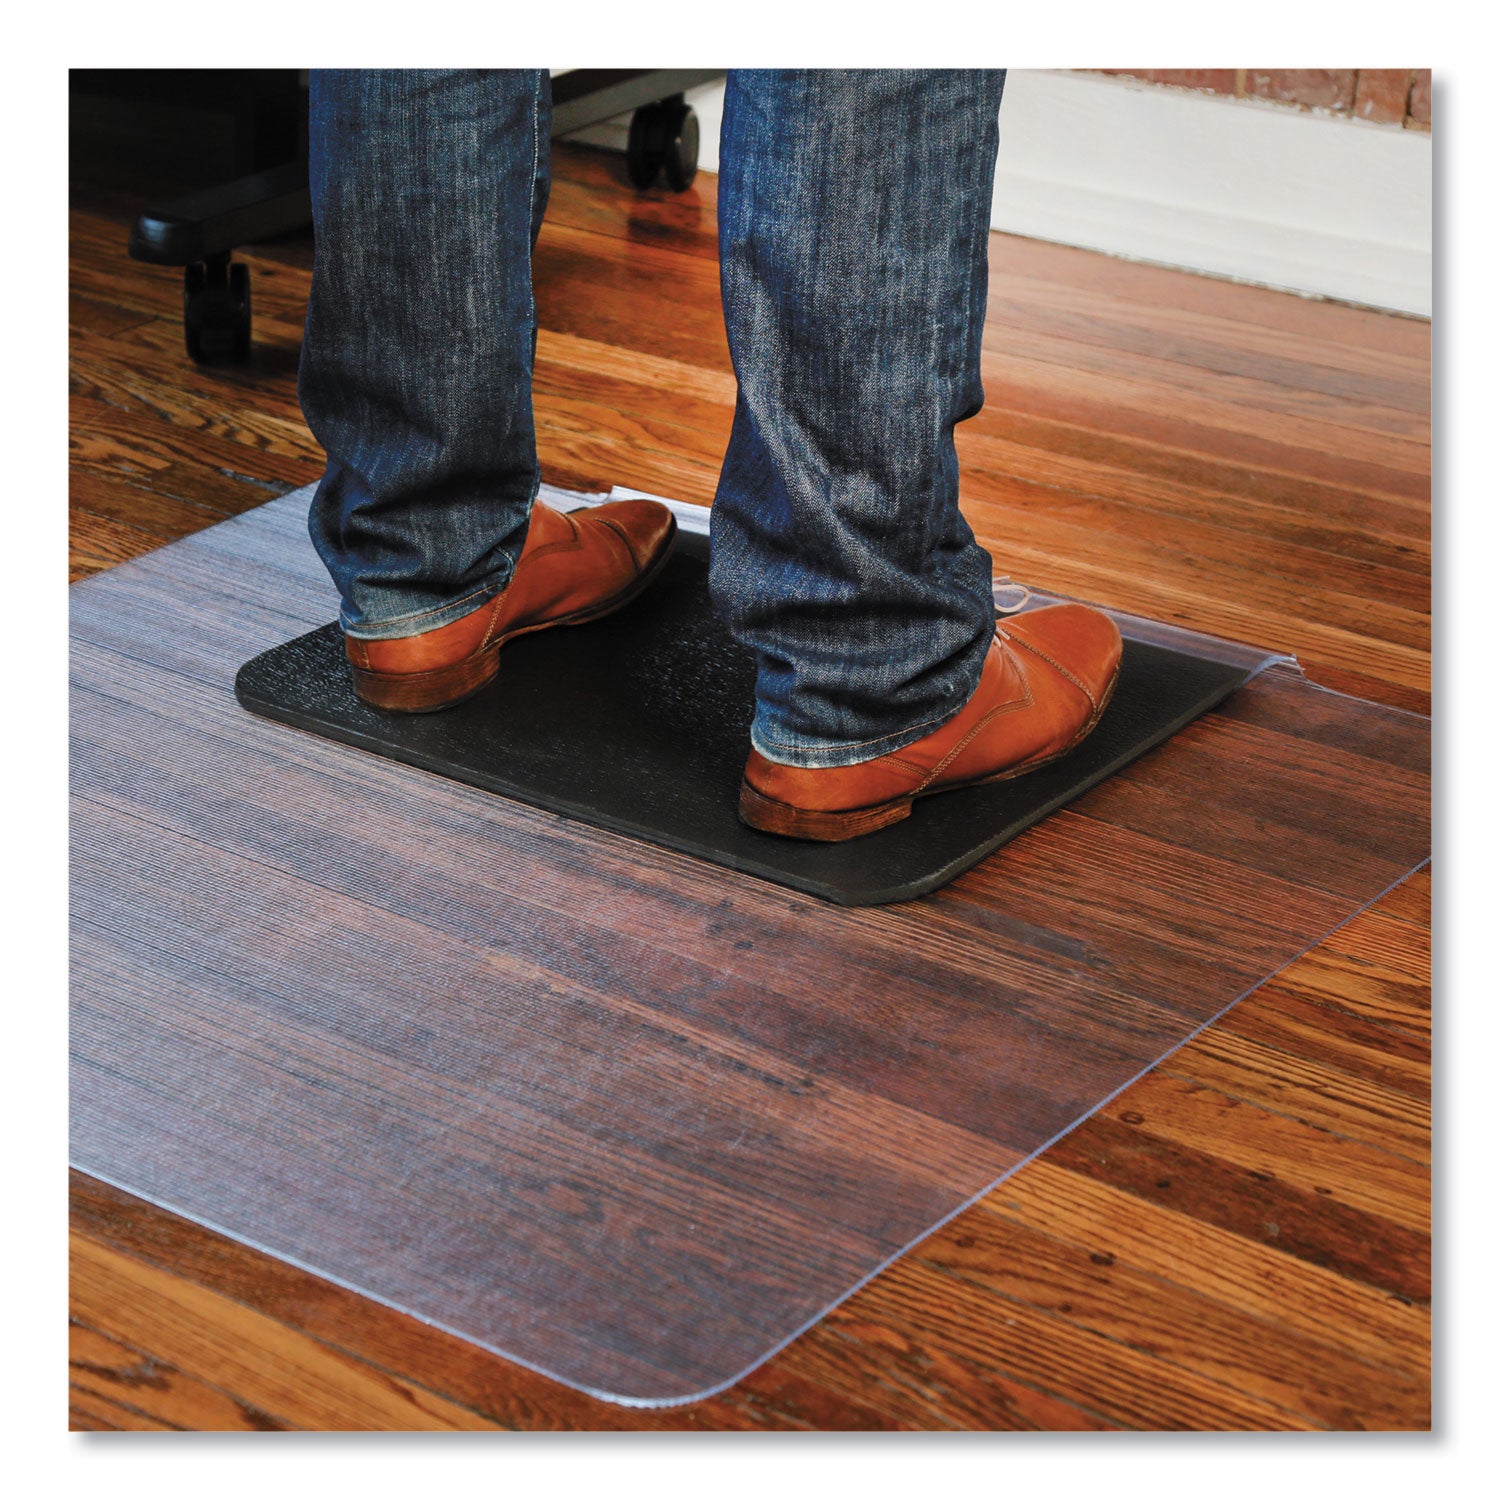 sit-or-stand-mat-for-carpet-or-hard-floors-36-x-53-with-lip-clear-black_esr184612 - 2